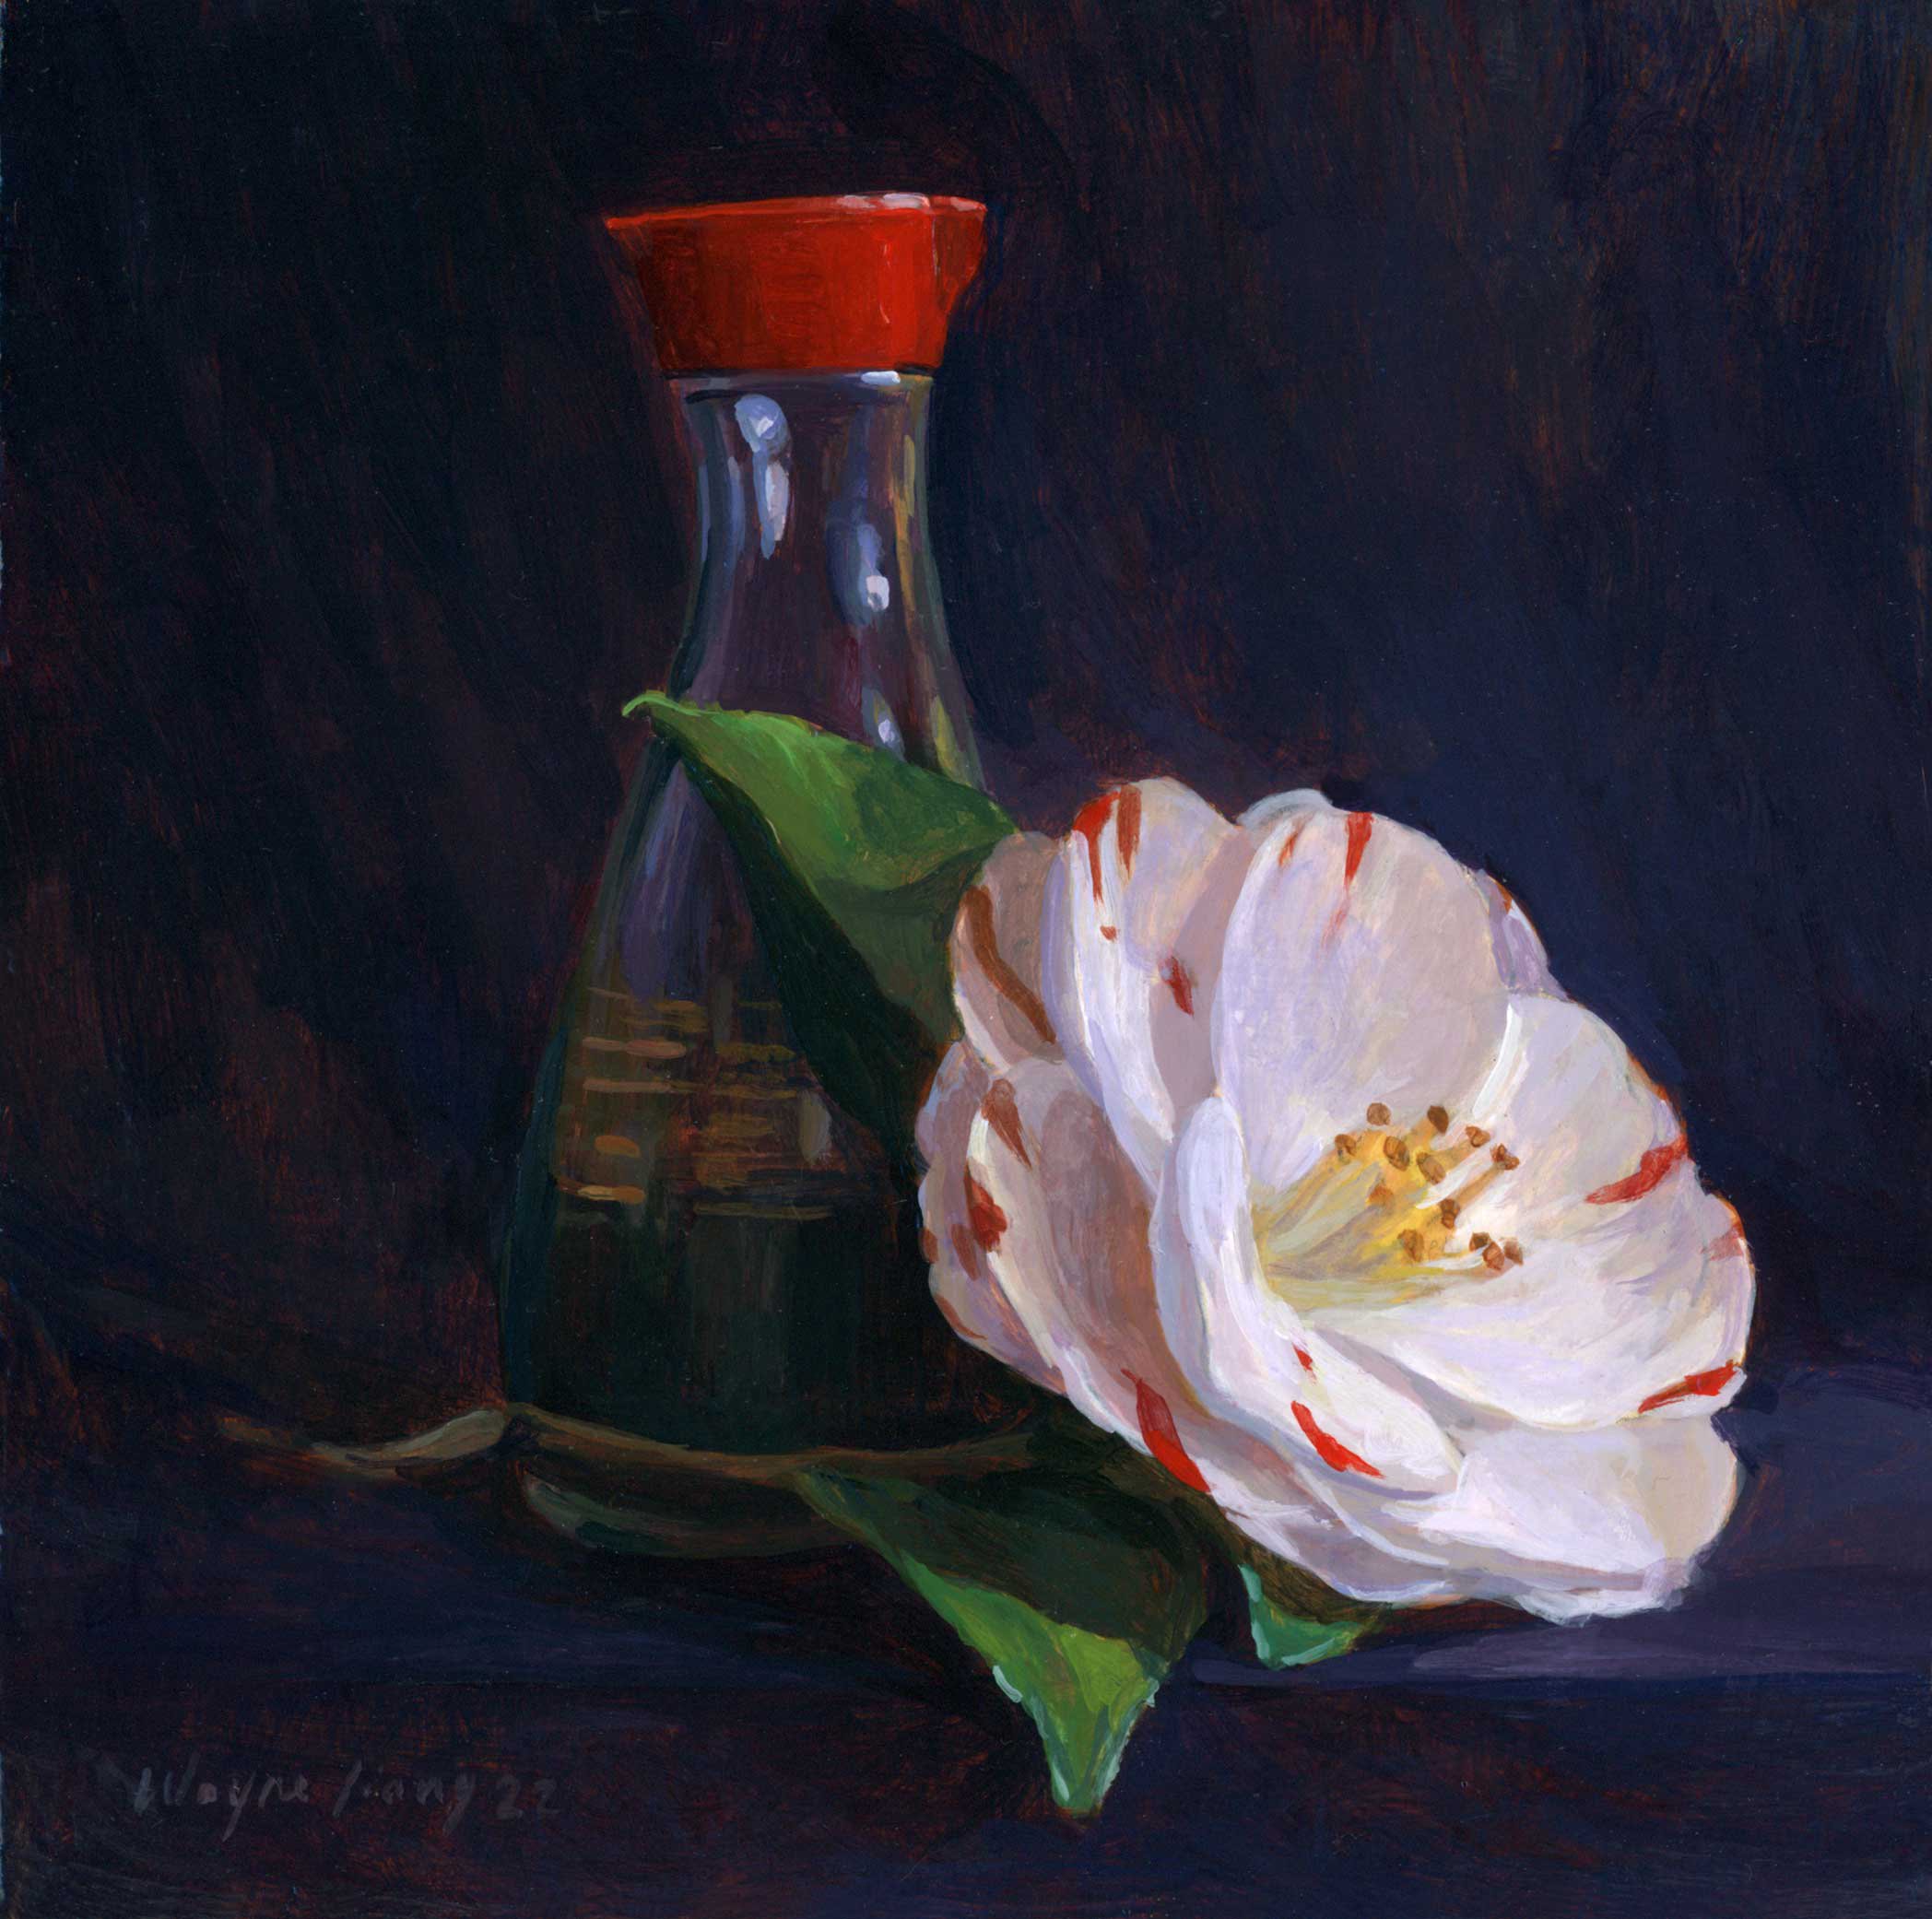 Soy Sauce Bottle and Camellia by Wayne Jiang